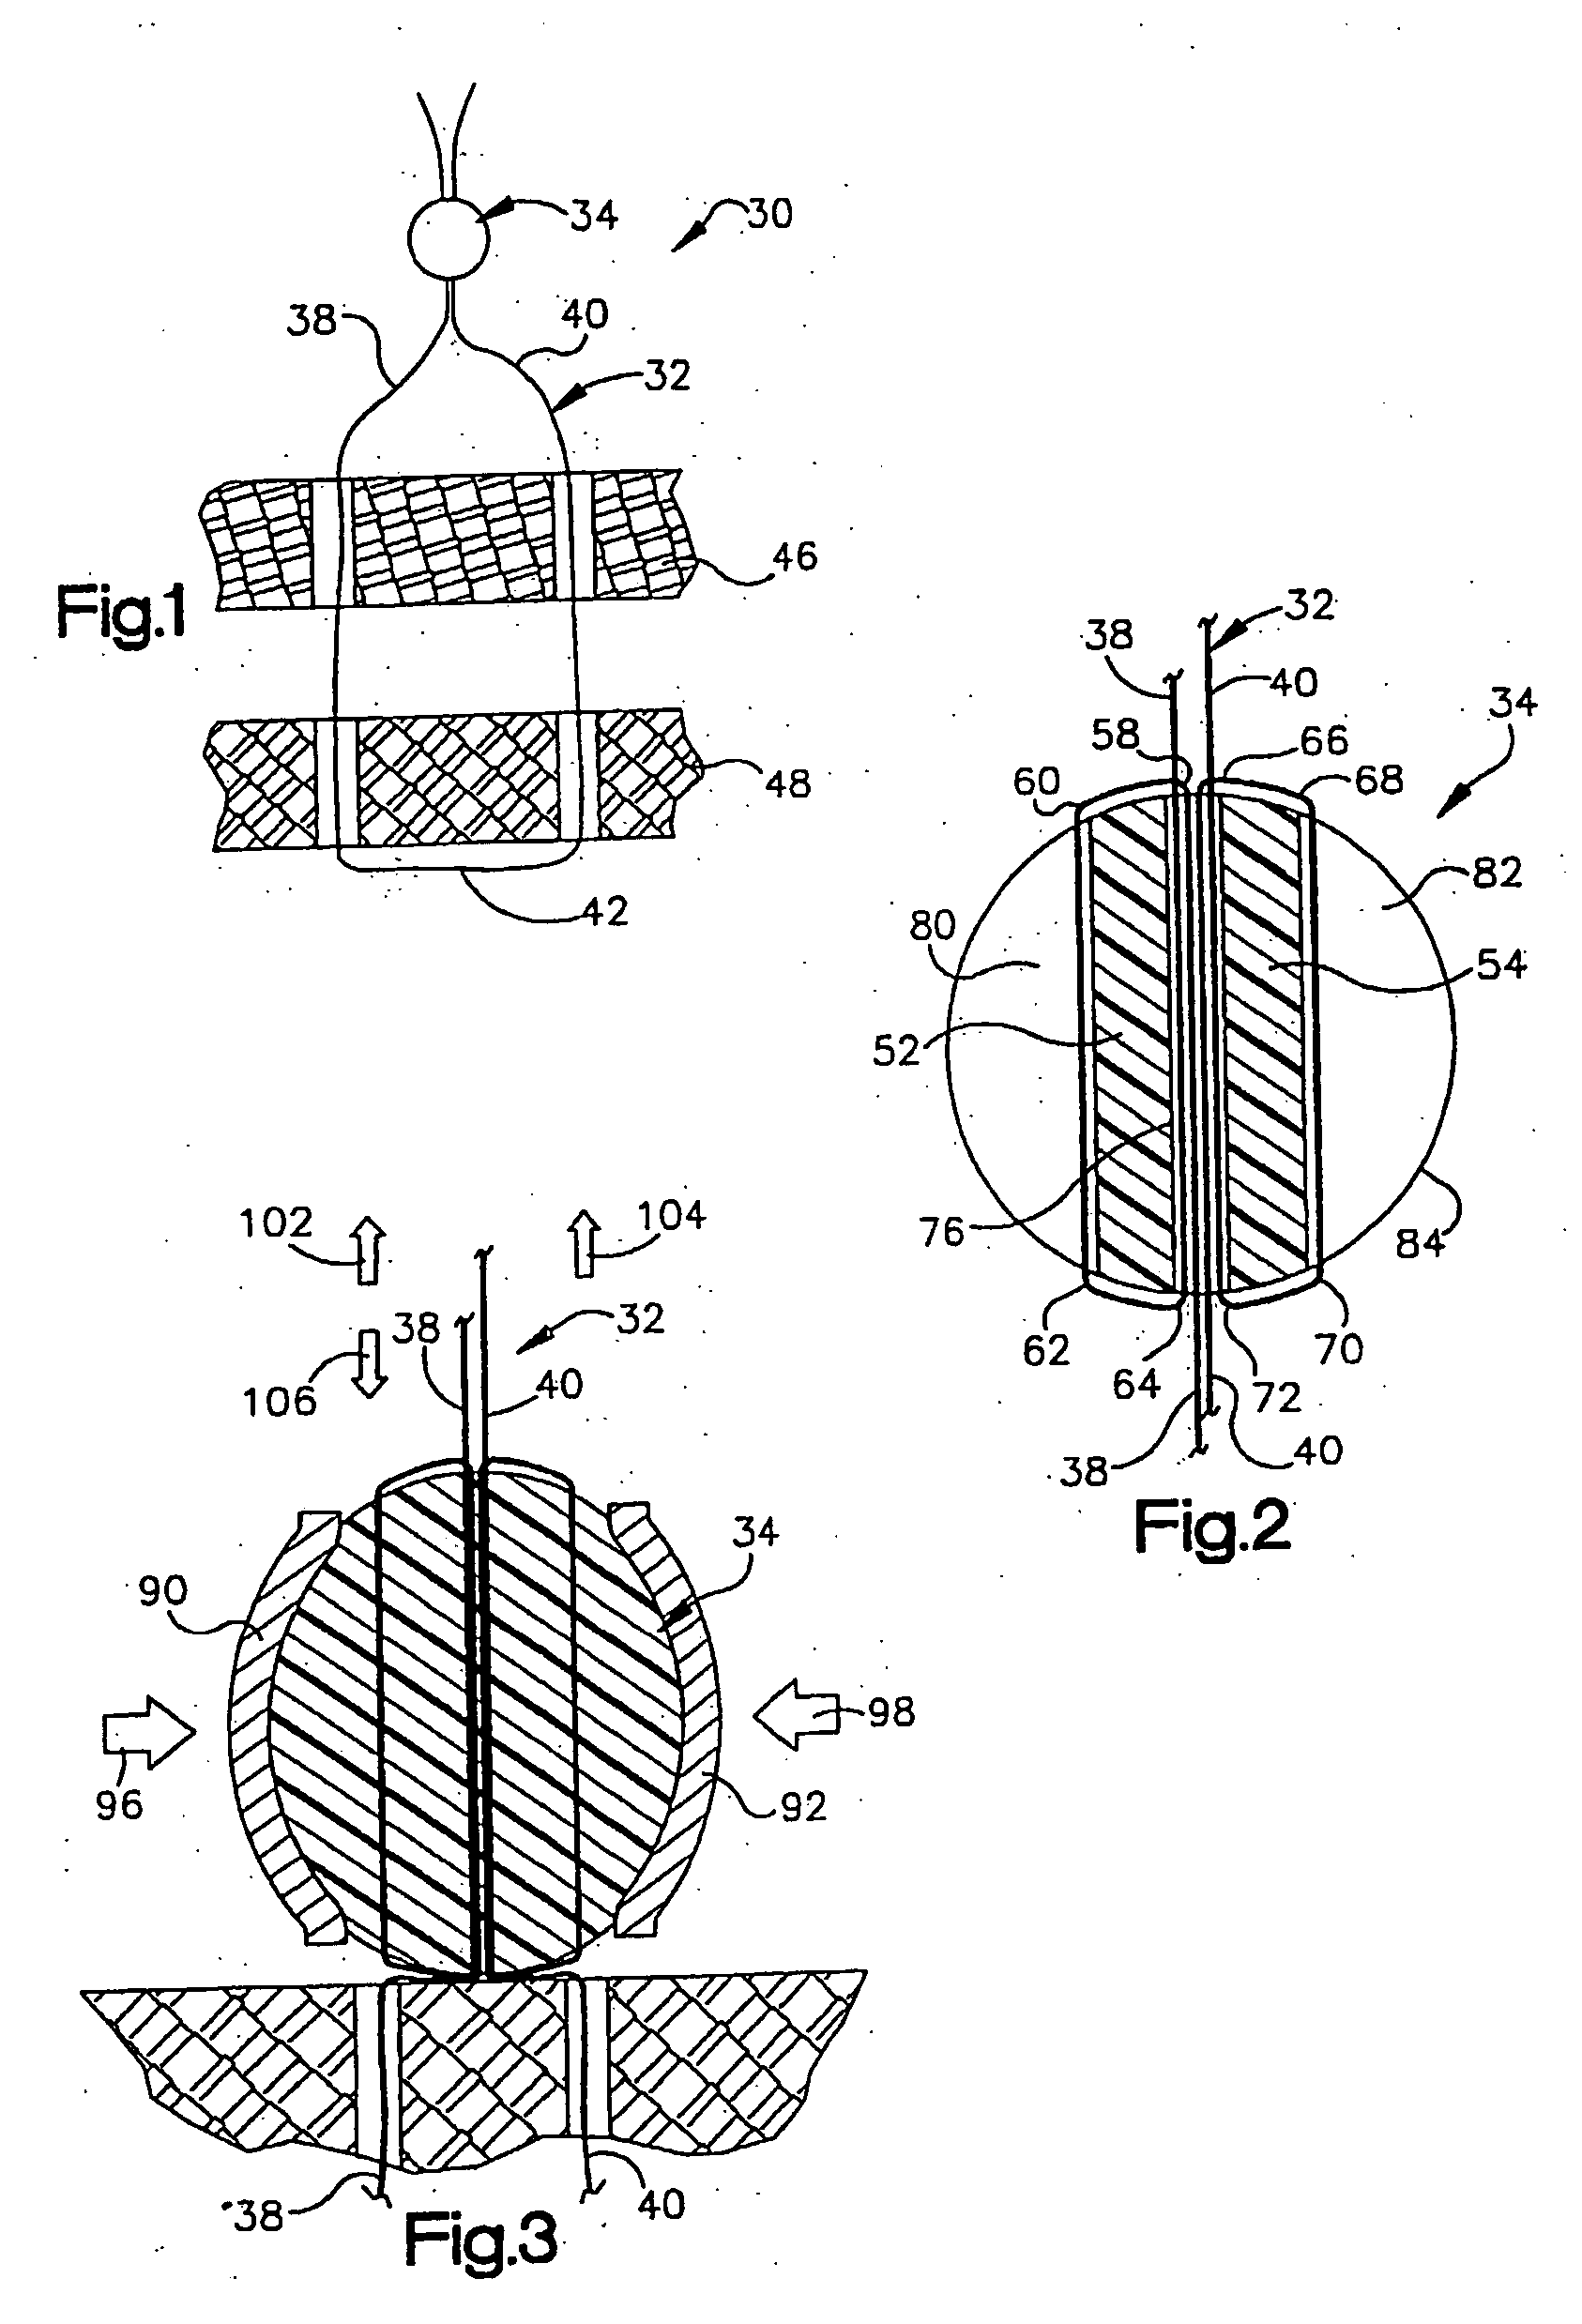 Method of using ultrasonic vibration to secure body tissue